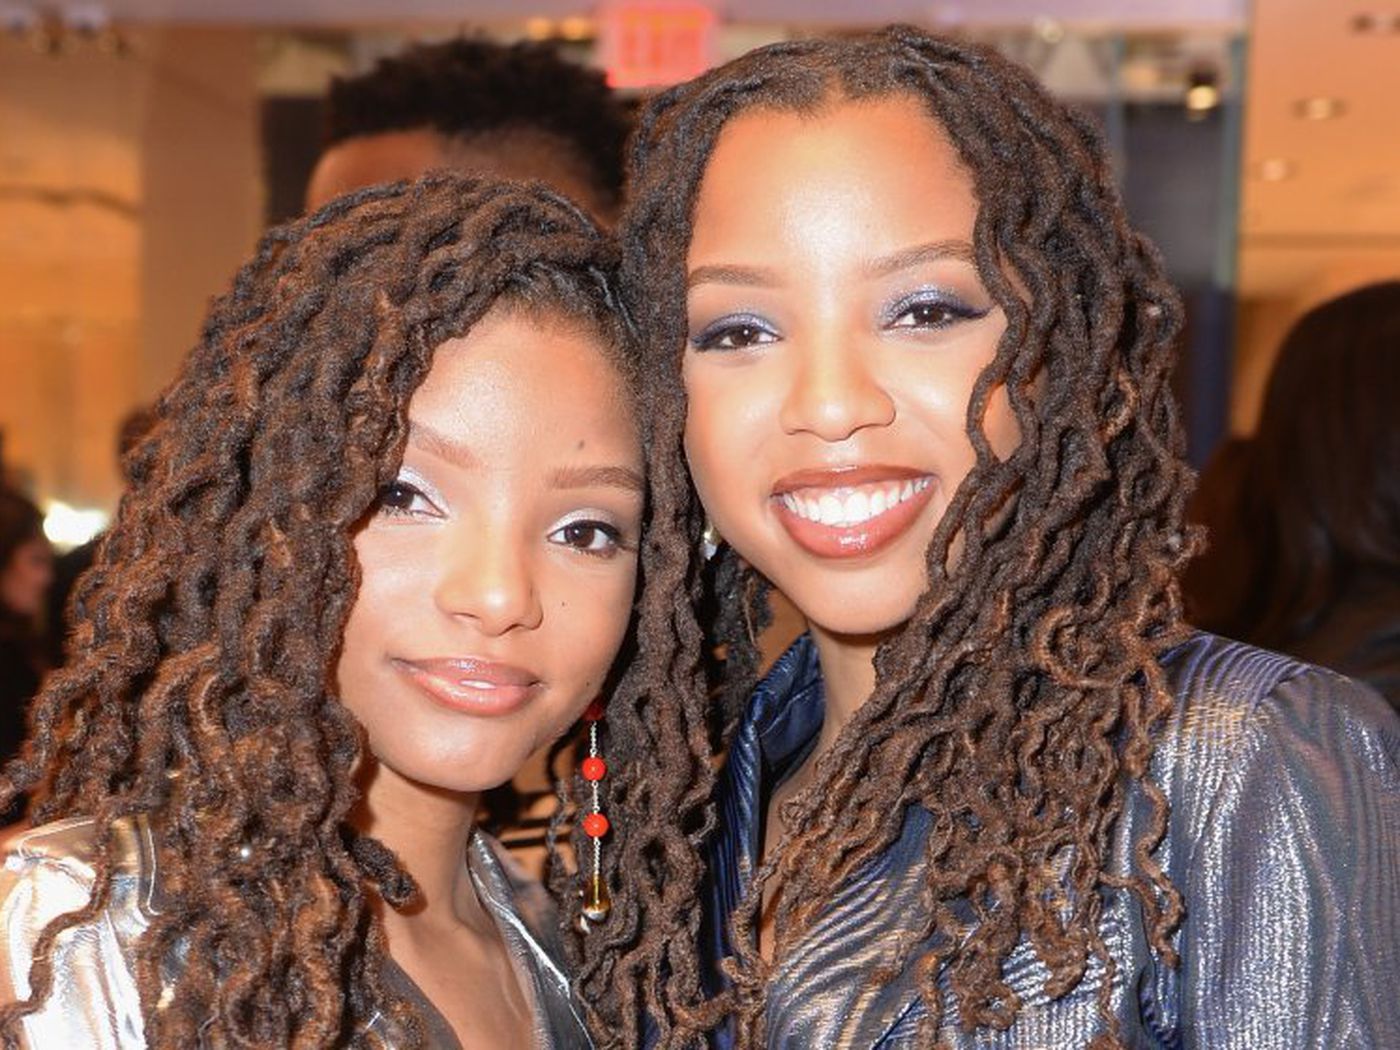 Halle Bailey sends message to critics of her sister Chloe: “Come talk to me”